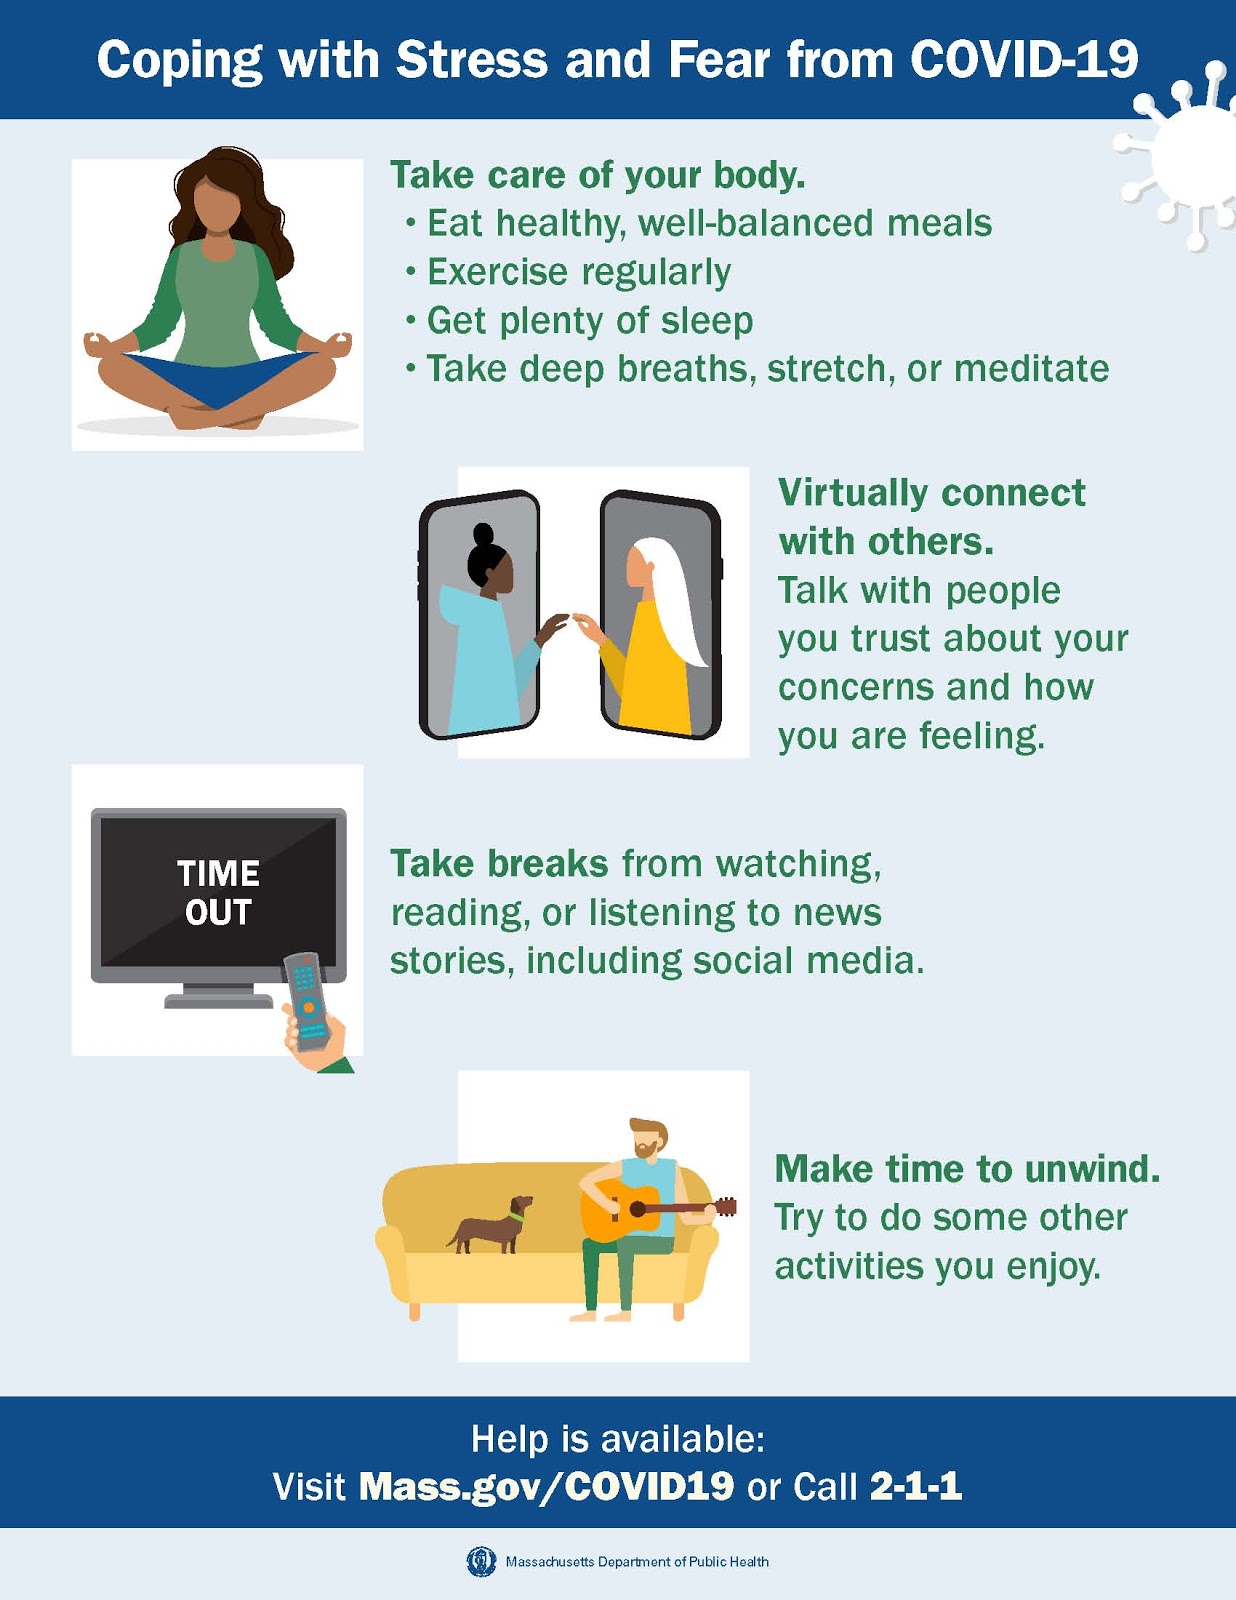 Take care of your body. Virtually connect with others. Take breaks from the news. Make time for fun activities.